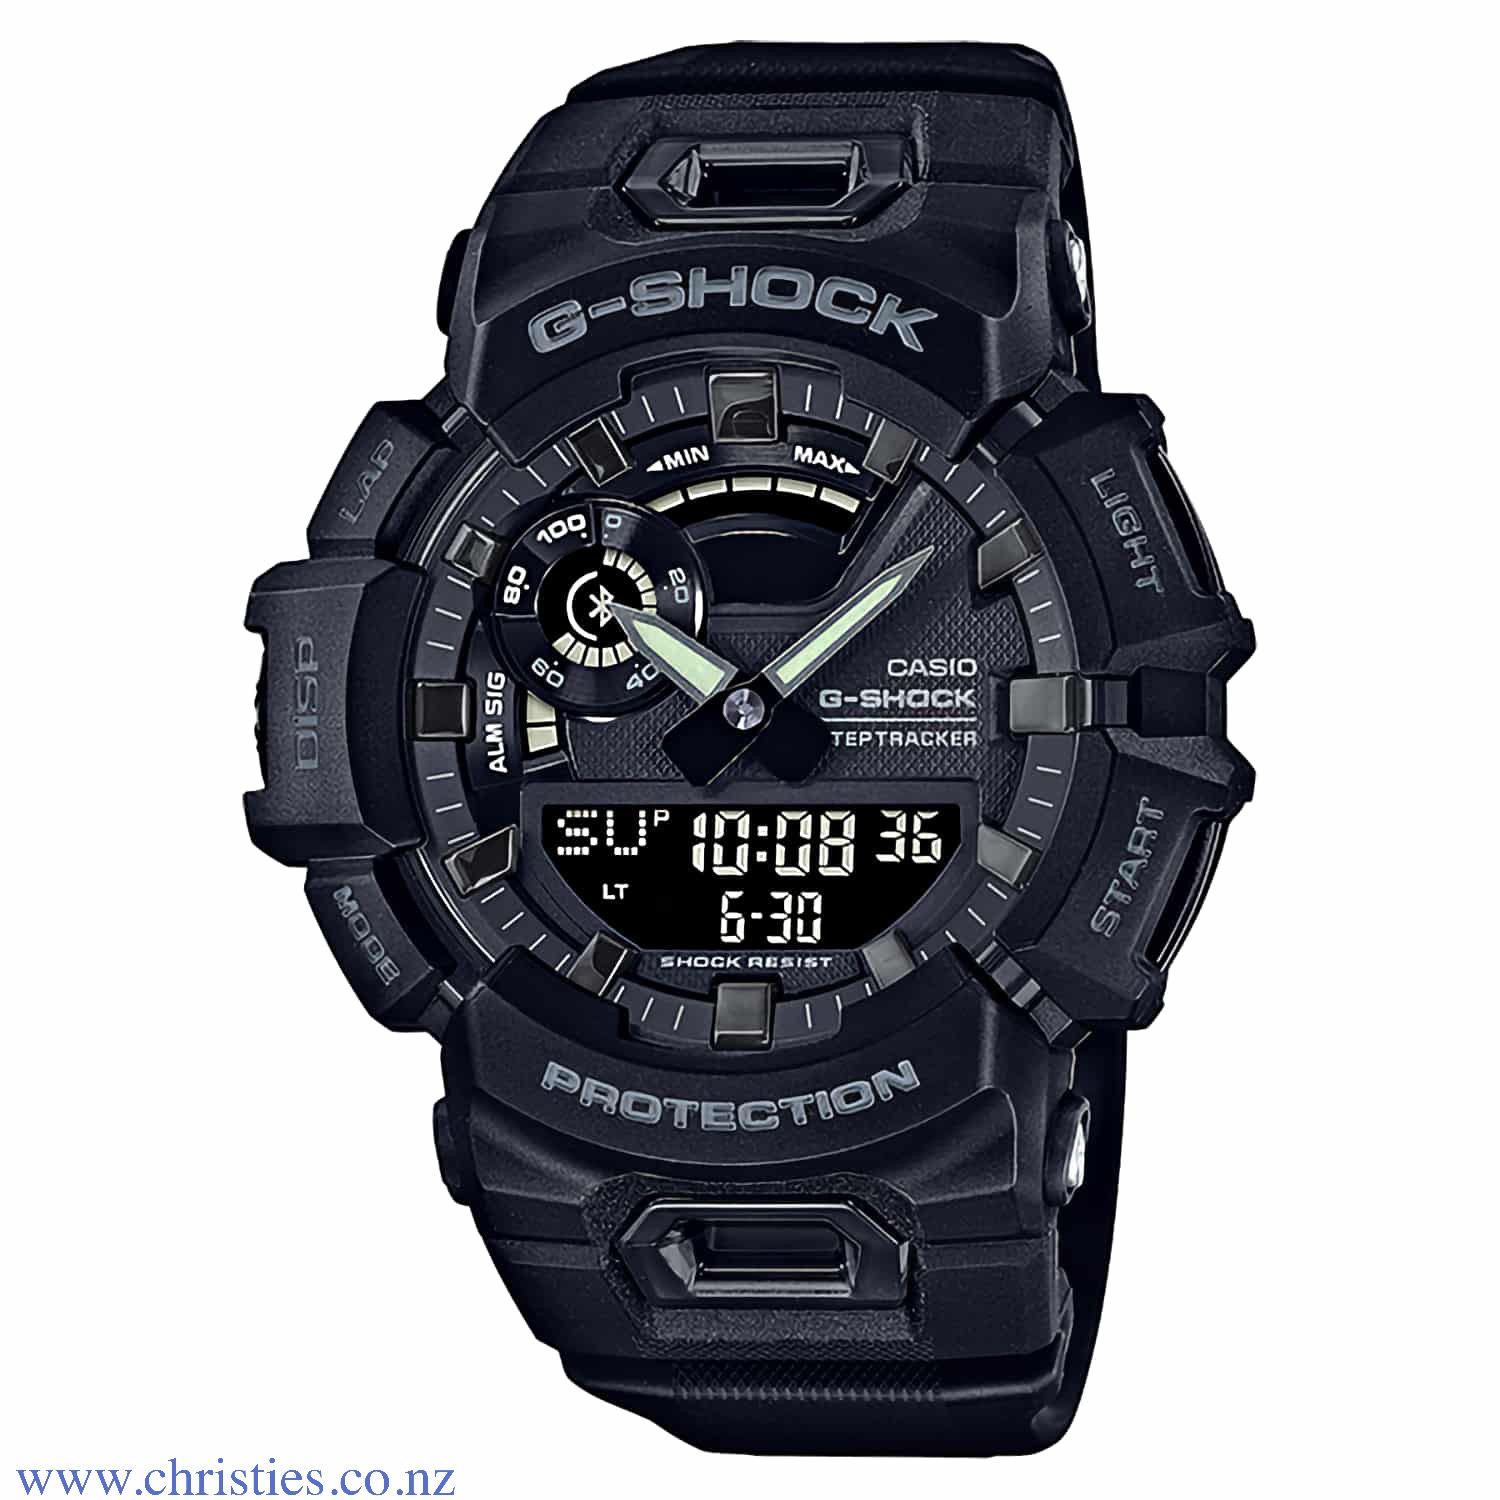 GBA900-1A G-SHOCK G-Squad Sports Watch. Introducing the latest G-SQUAD additions to the GBA-900 Series of Smartphone Link timepieces. This model can measure distance using an accelerometer while linked with the GPS function of a smartphone via Bluetooth®